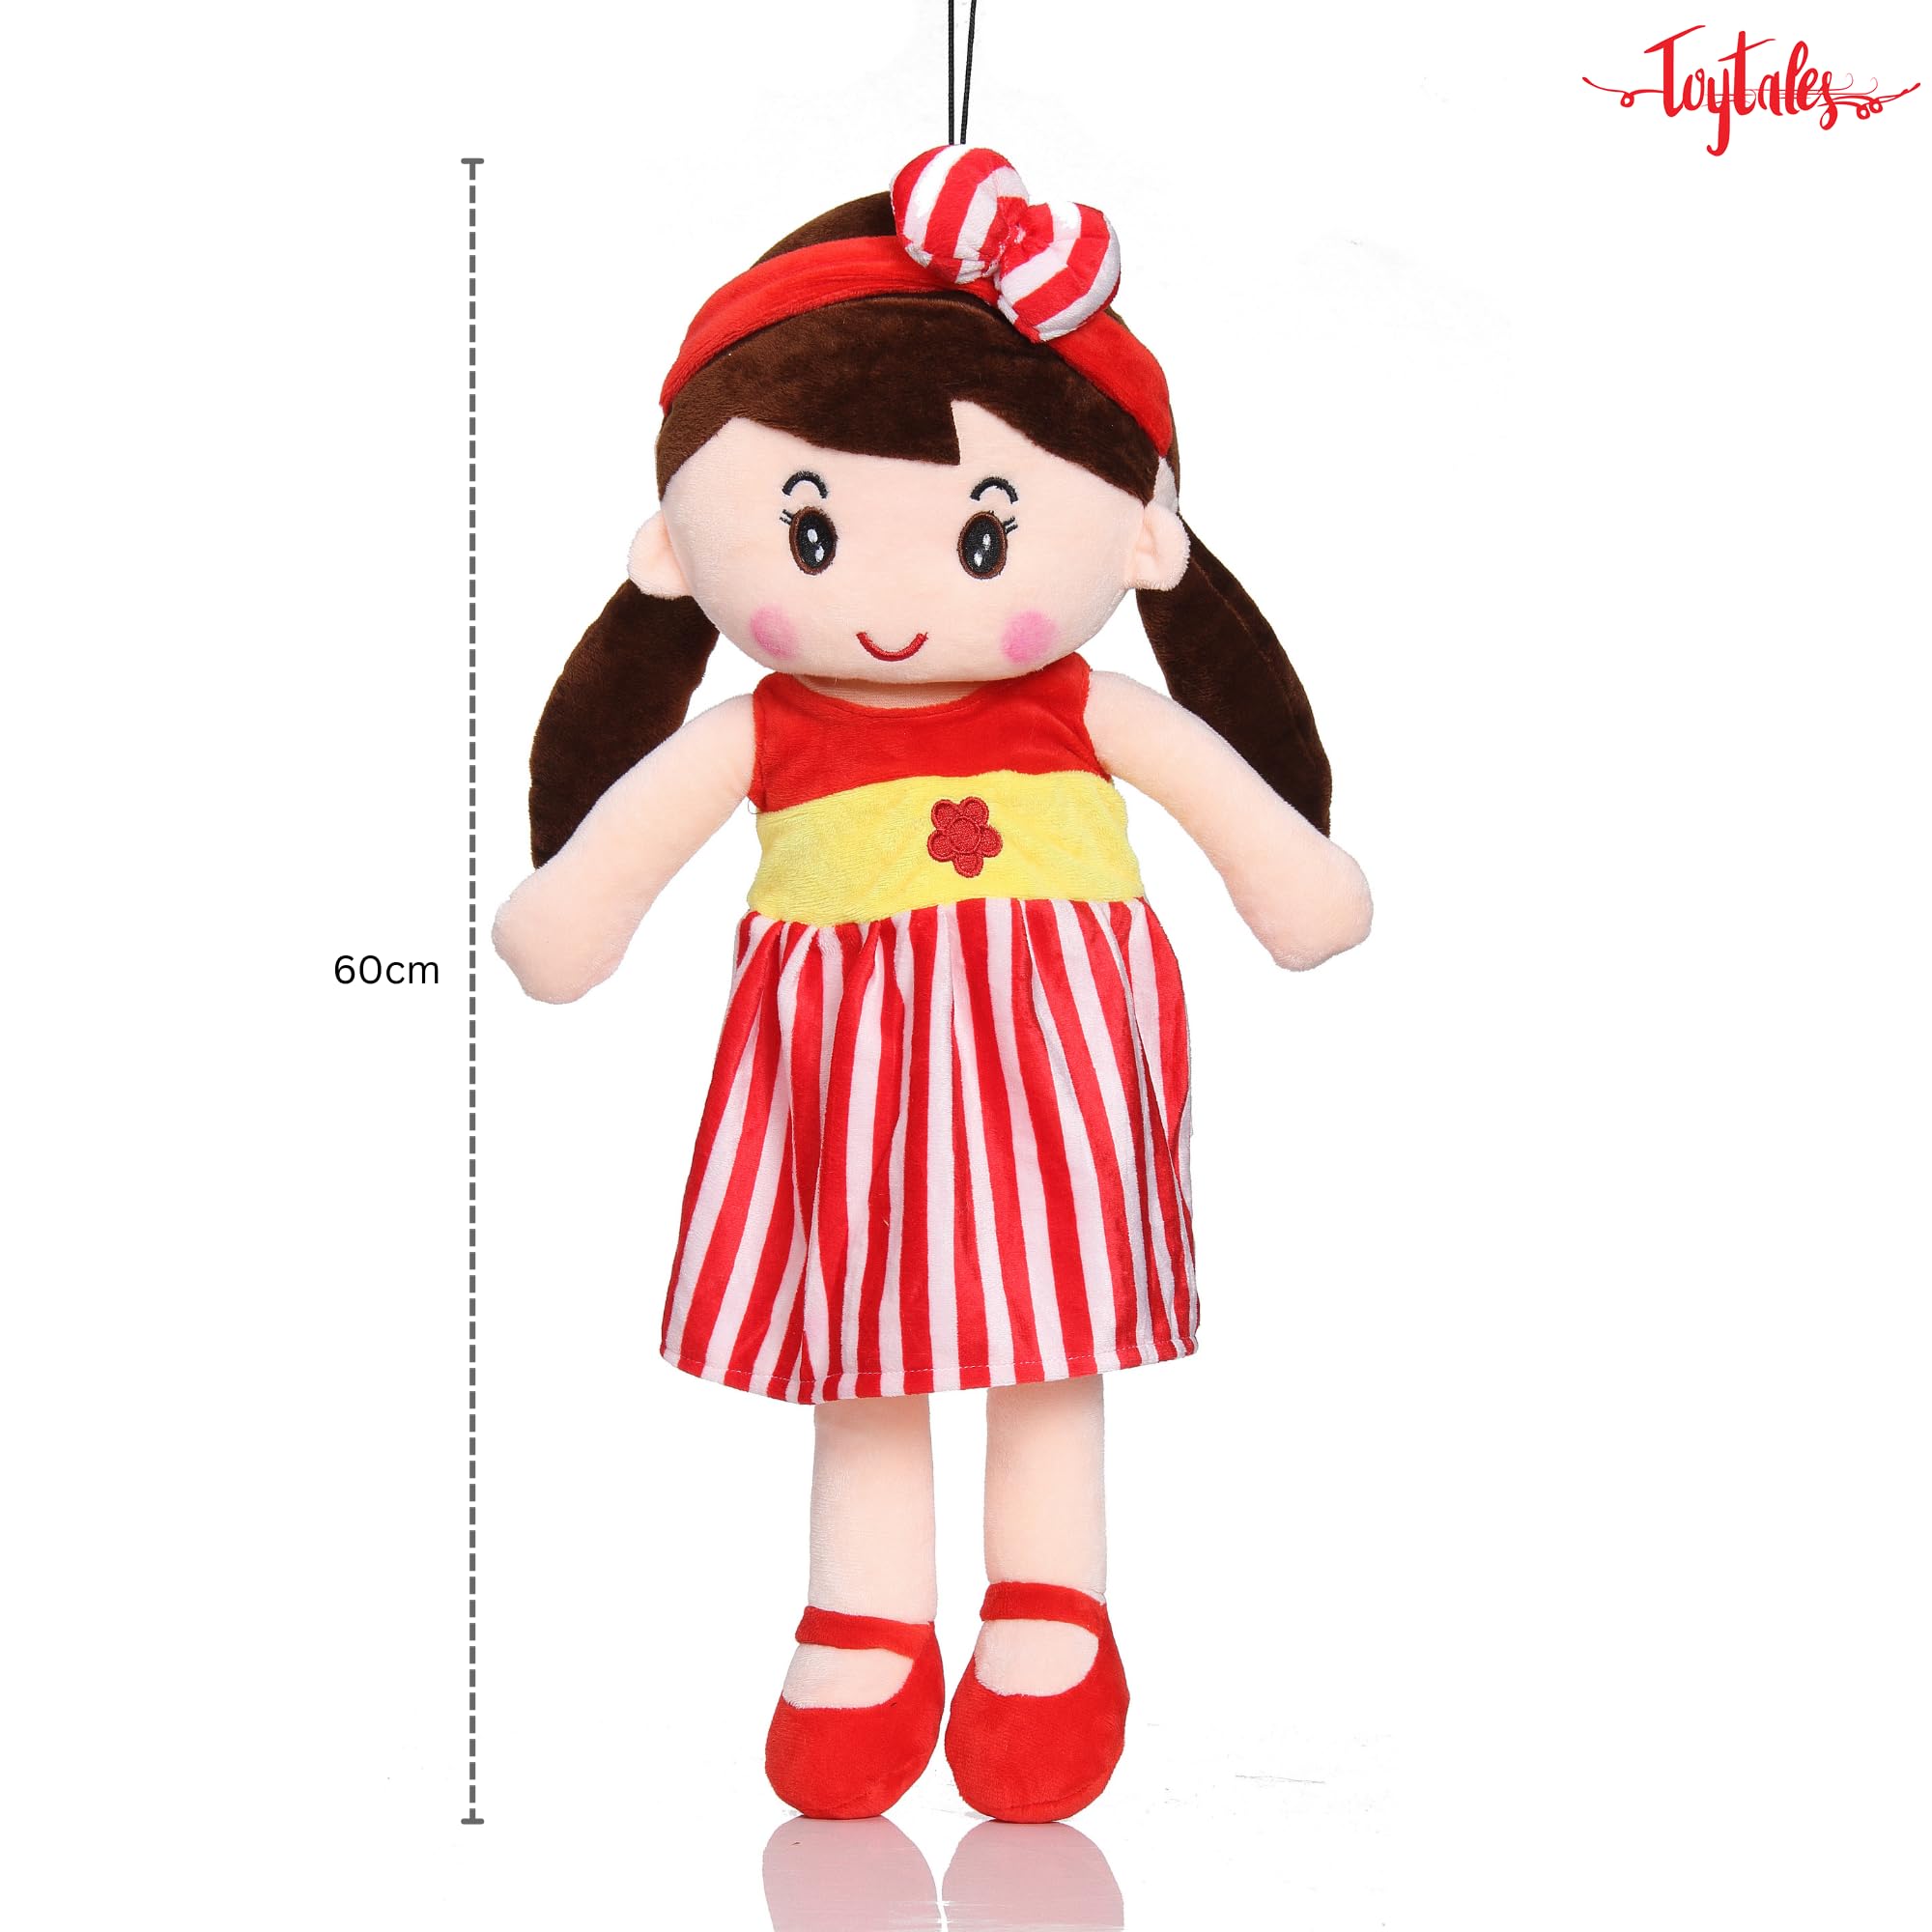 Cute Super Soft Stuffed Doll Medium Size 60cm, Cuddly Squishy Dolls, Plush Toy for Baby Girls, Spark Imaginative Play, Safe & Fun Gift for Kids, Perfect for Playtime & Cuddling (Red)